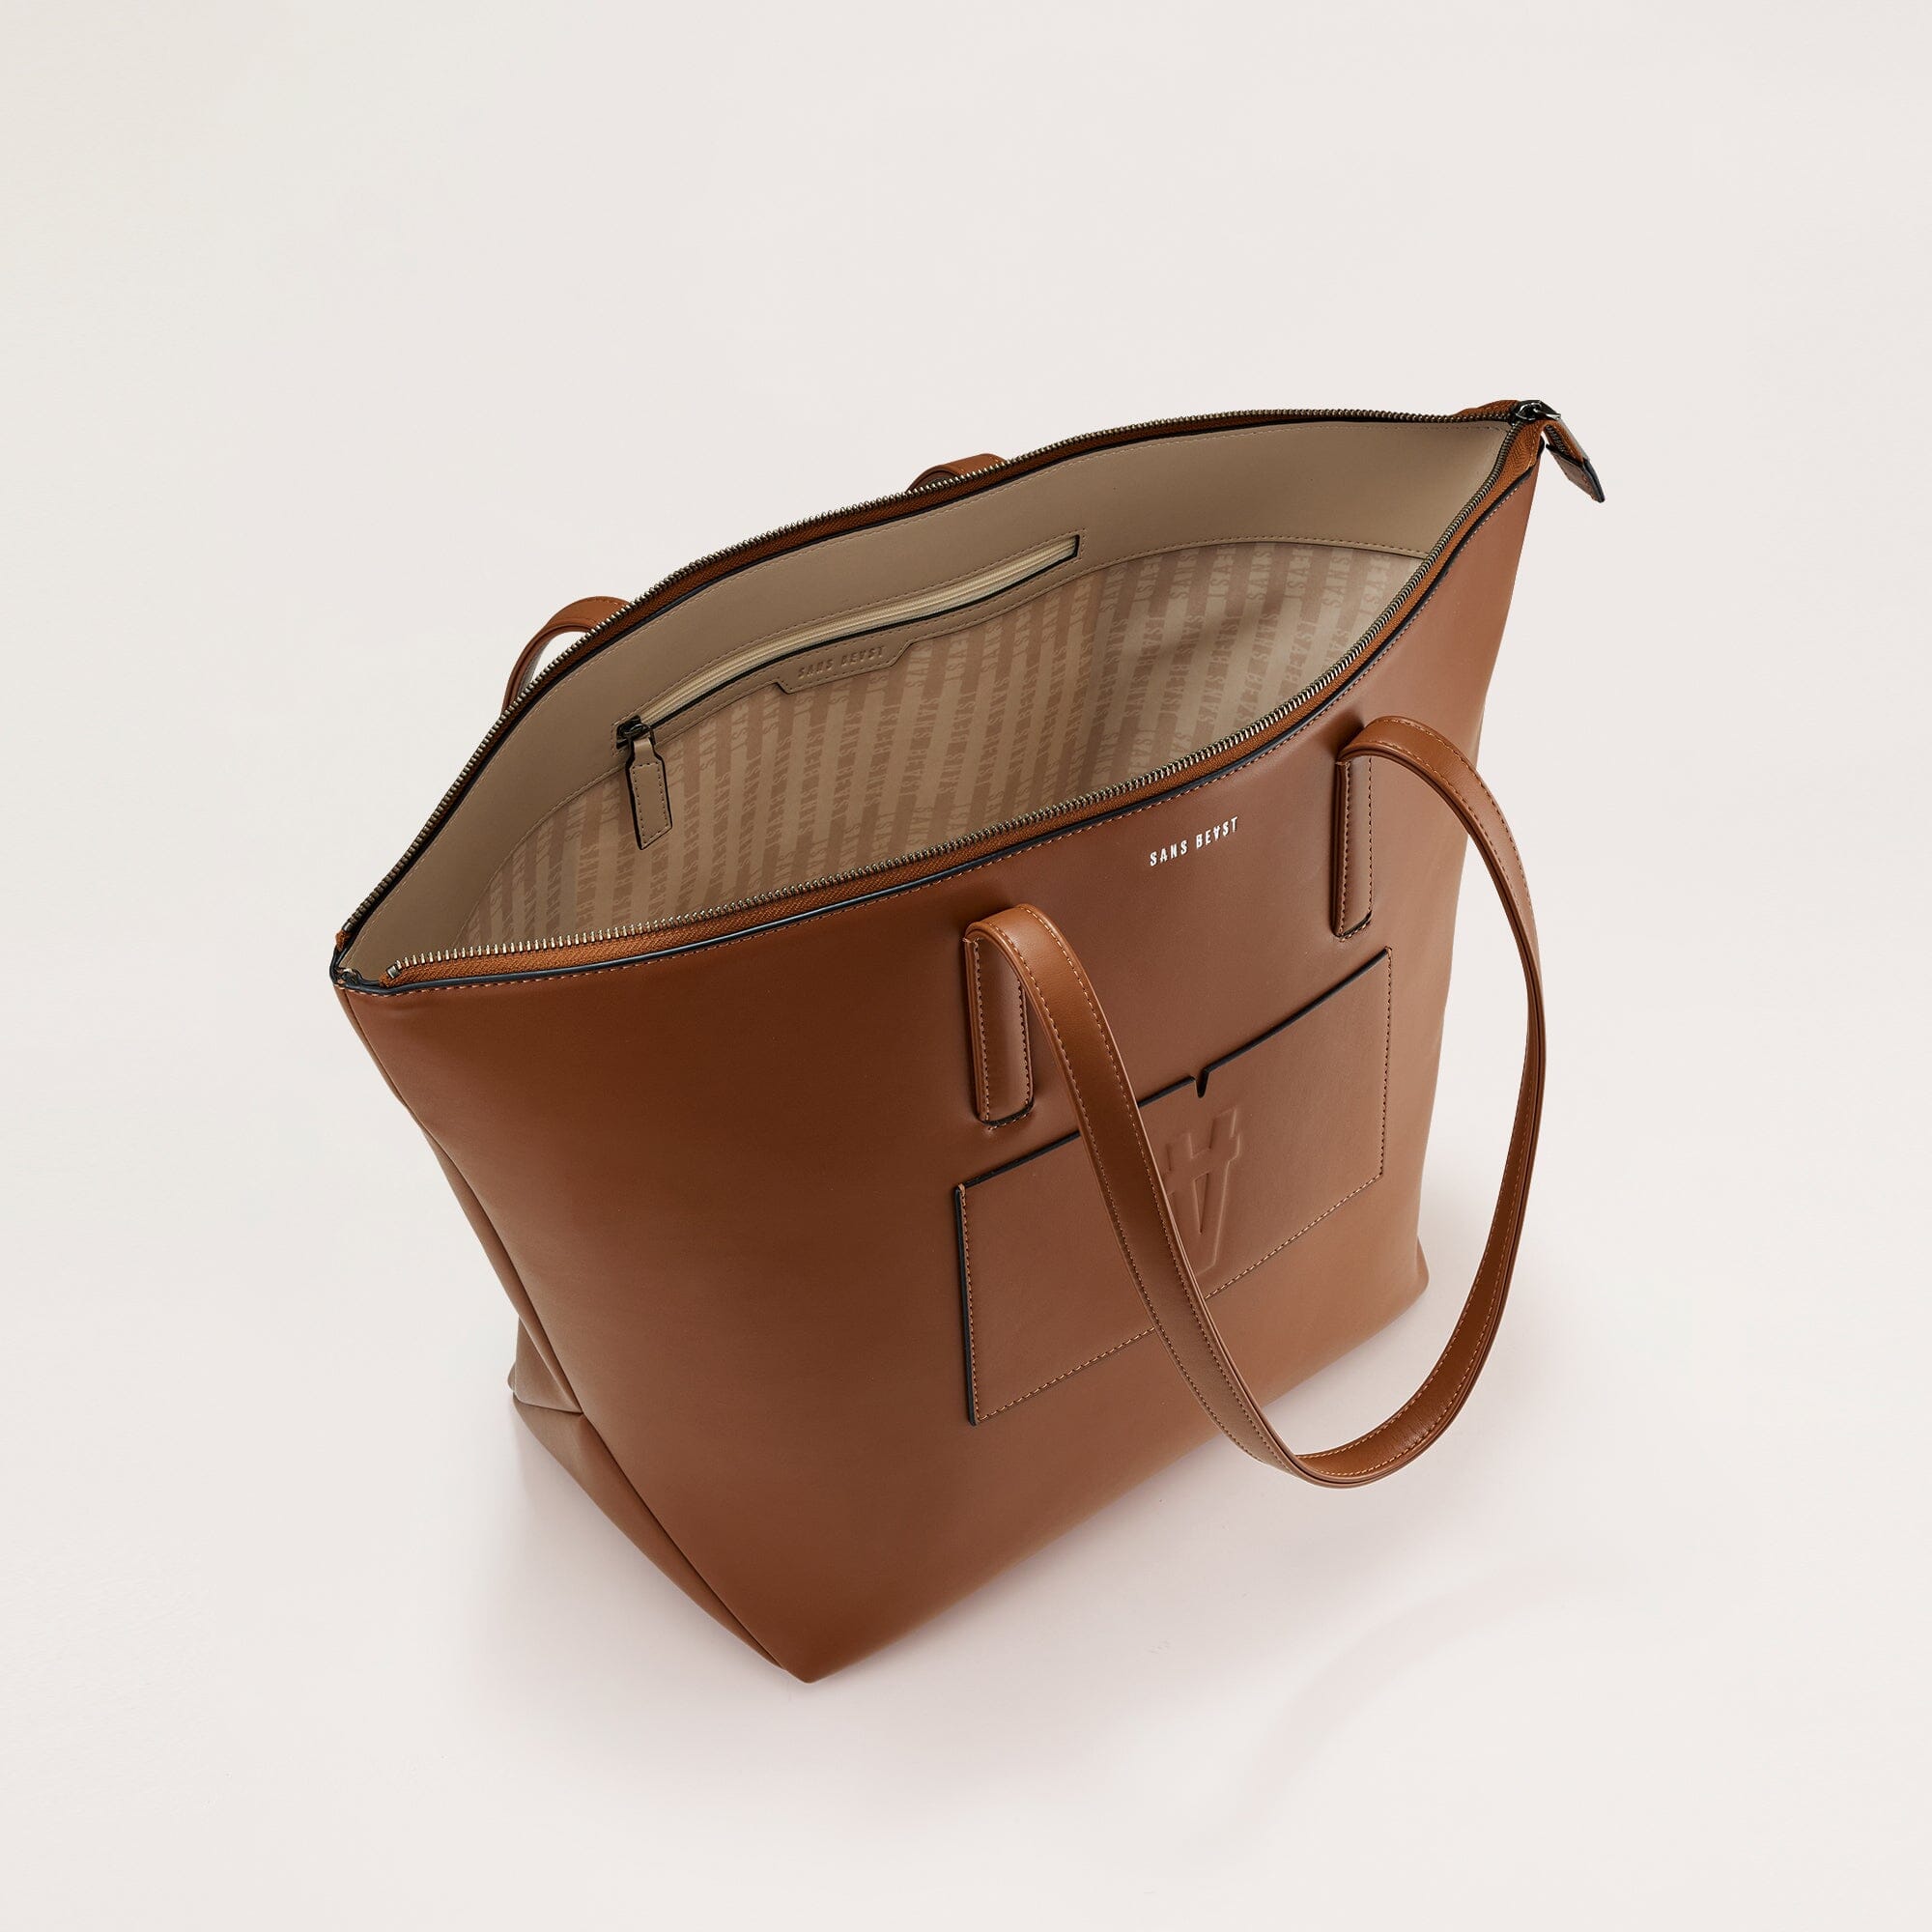 Nomad Vegan Leather Tote Bag Brown side view